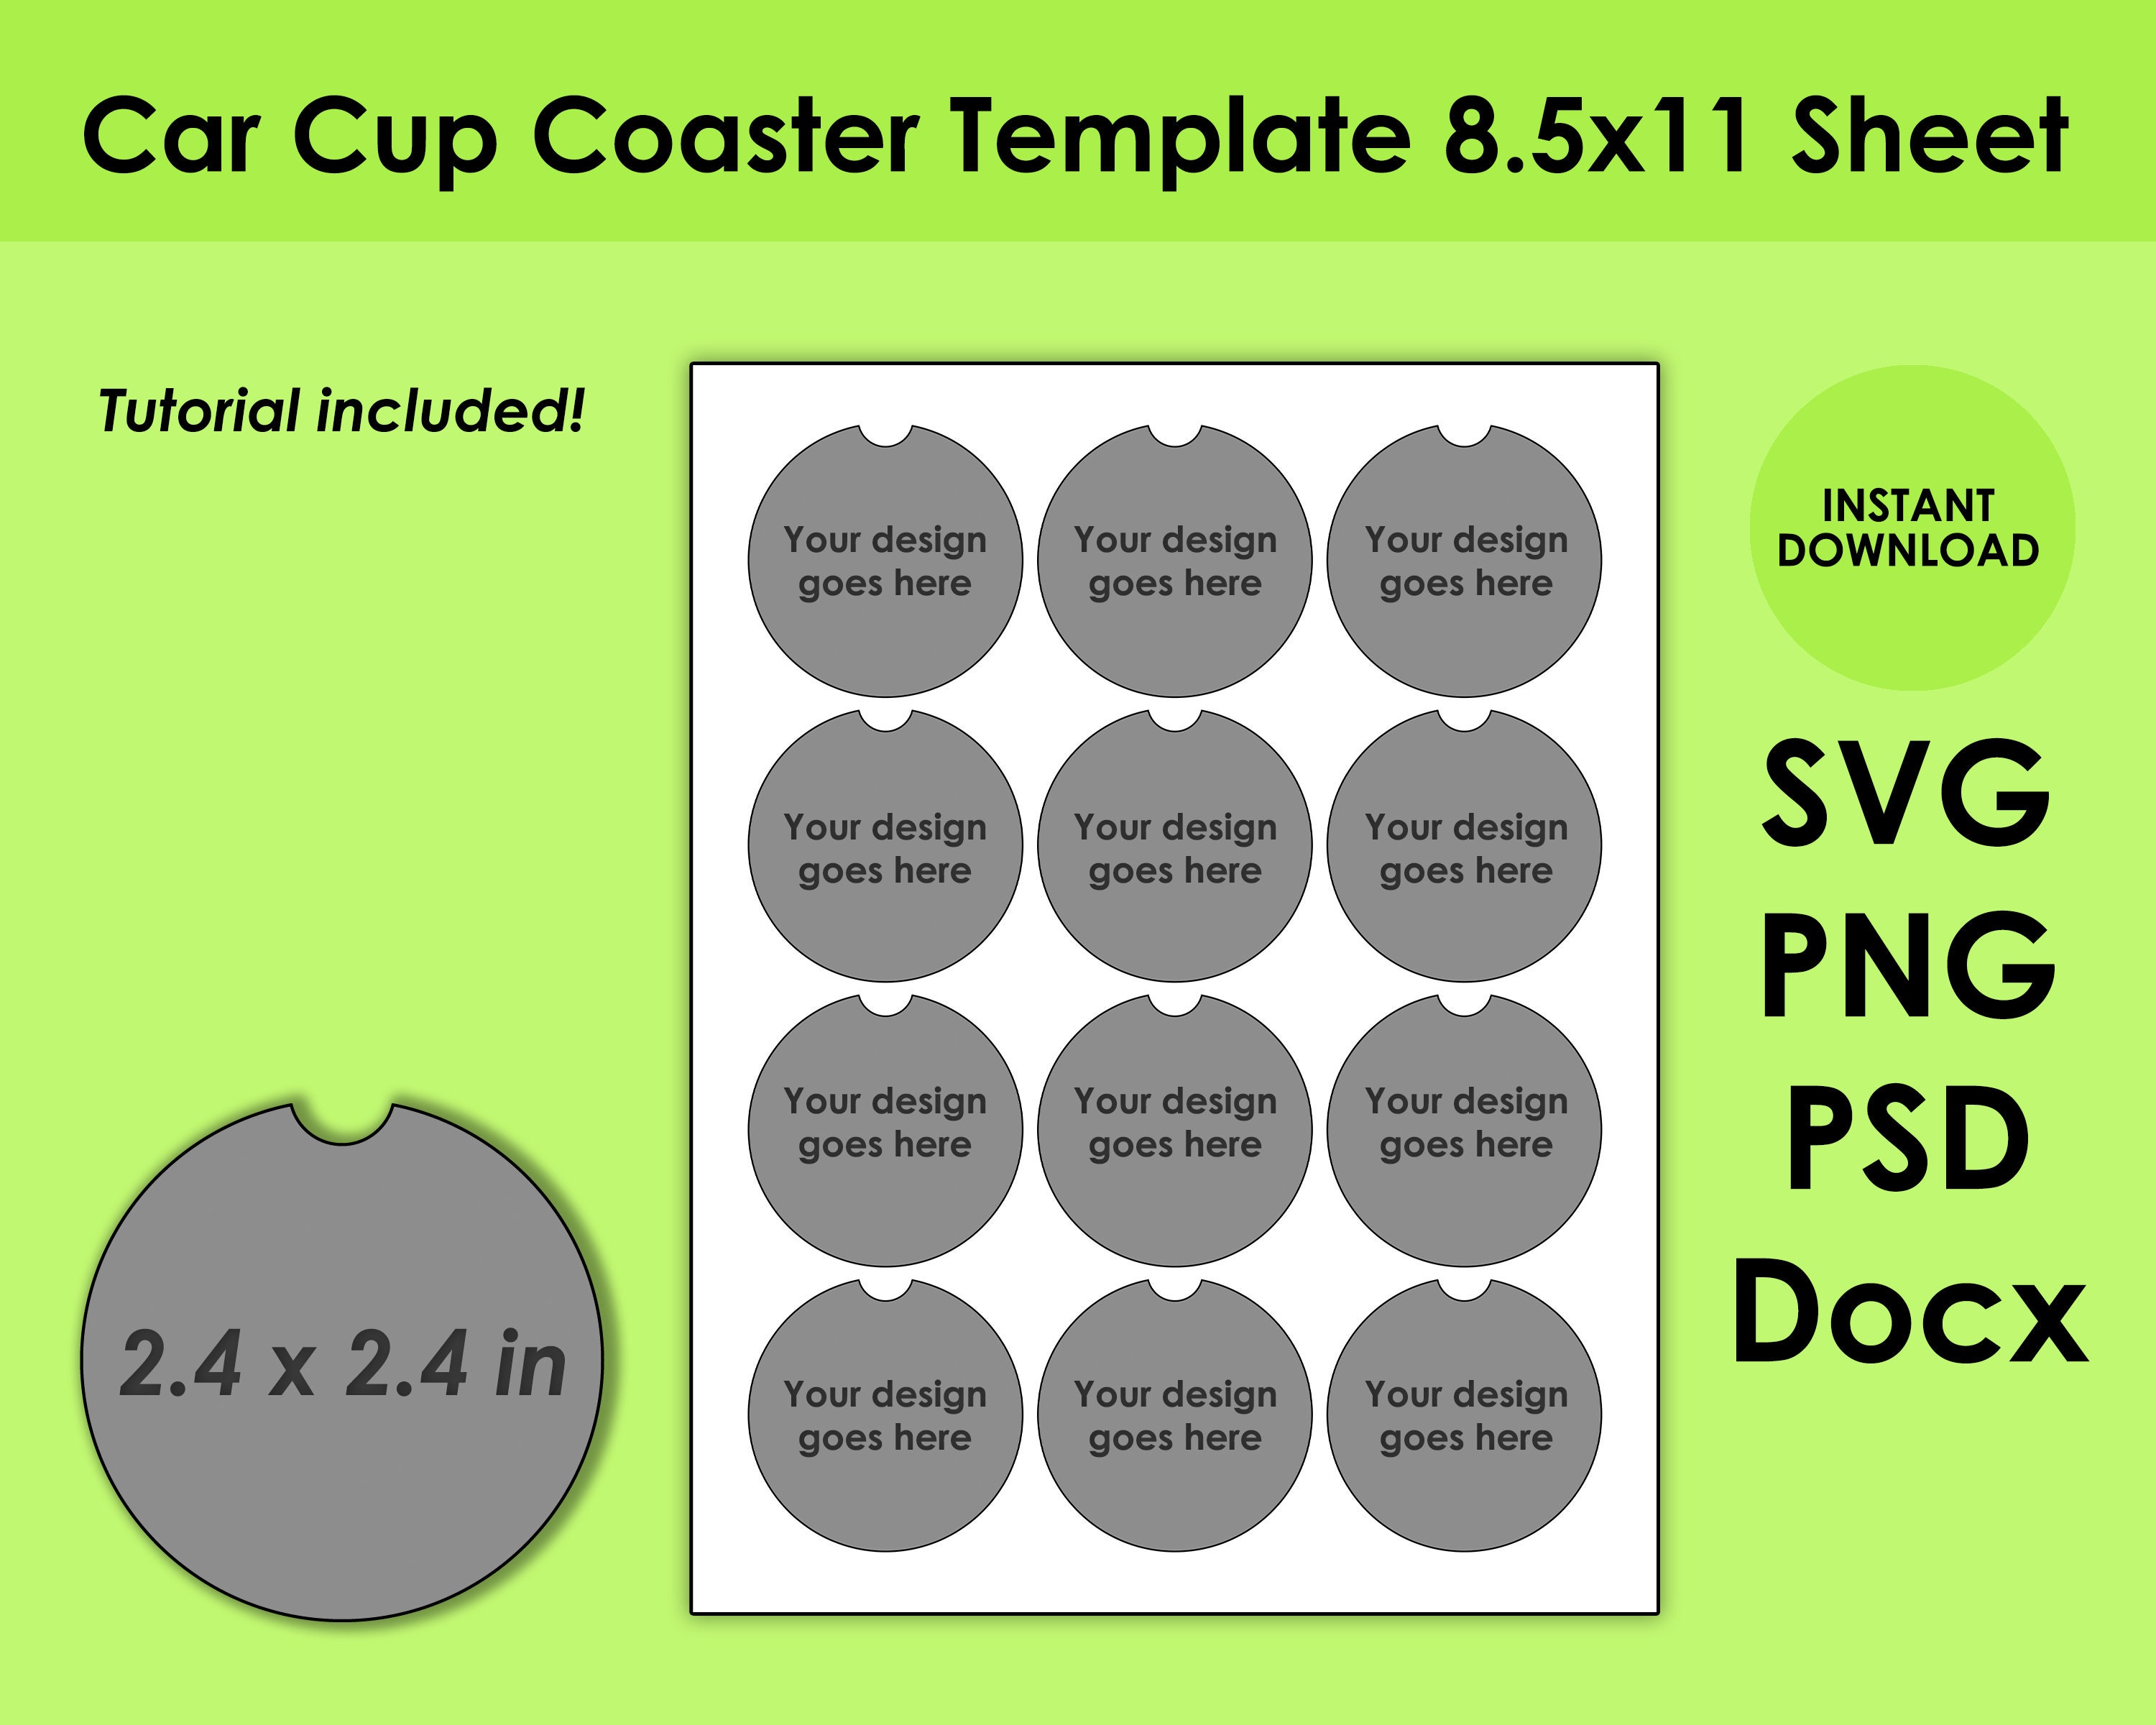 car-cup-coaster-template-8-5x11-sheet-svg-png-psd-and-docx-etsy